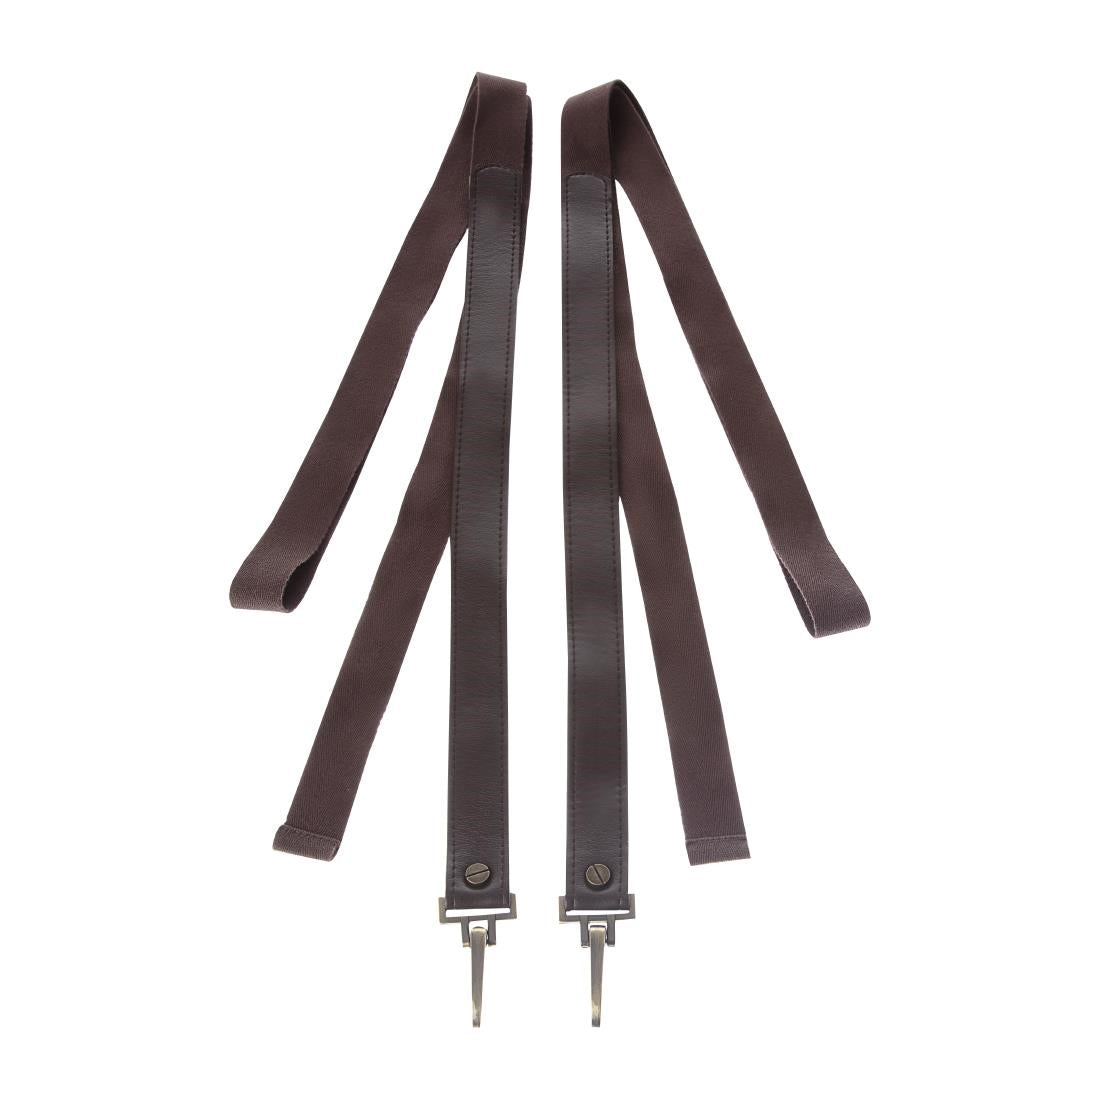 FT608 Southside Apron Spare Doghook PU strap Chocolate (2 pack) JD Catering Equipment Solutions Ltd